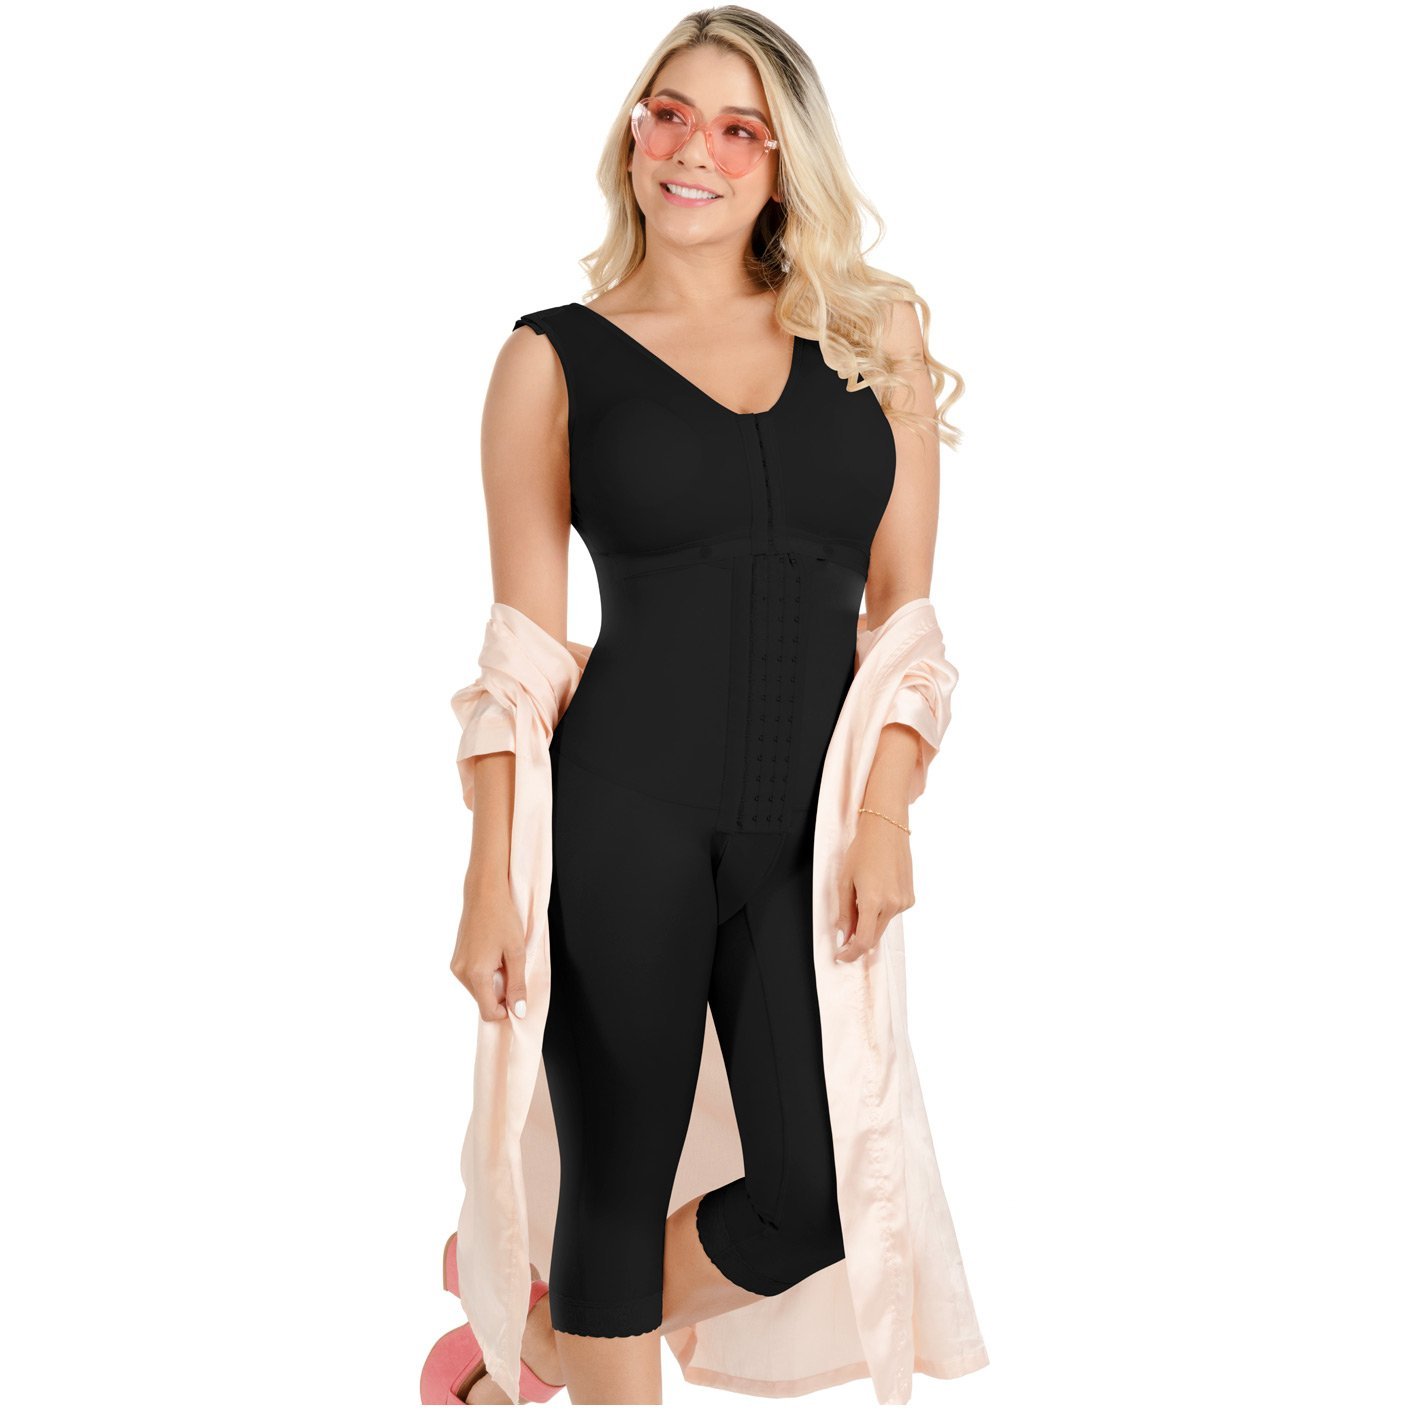 SONRYSE TR052 Colombian Full Body Shaper for Women - New England Supplier